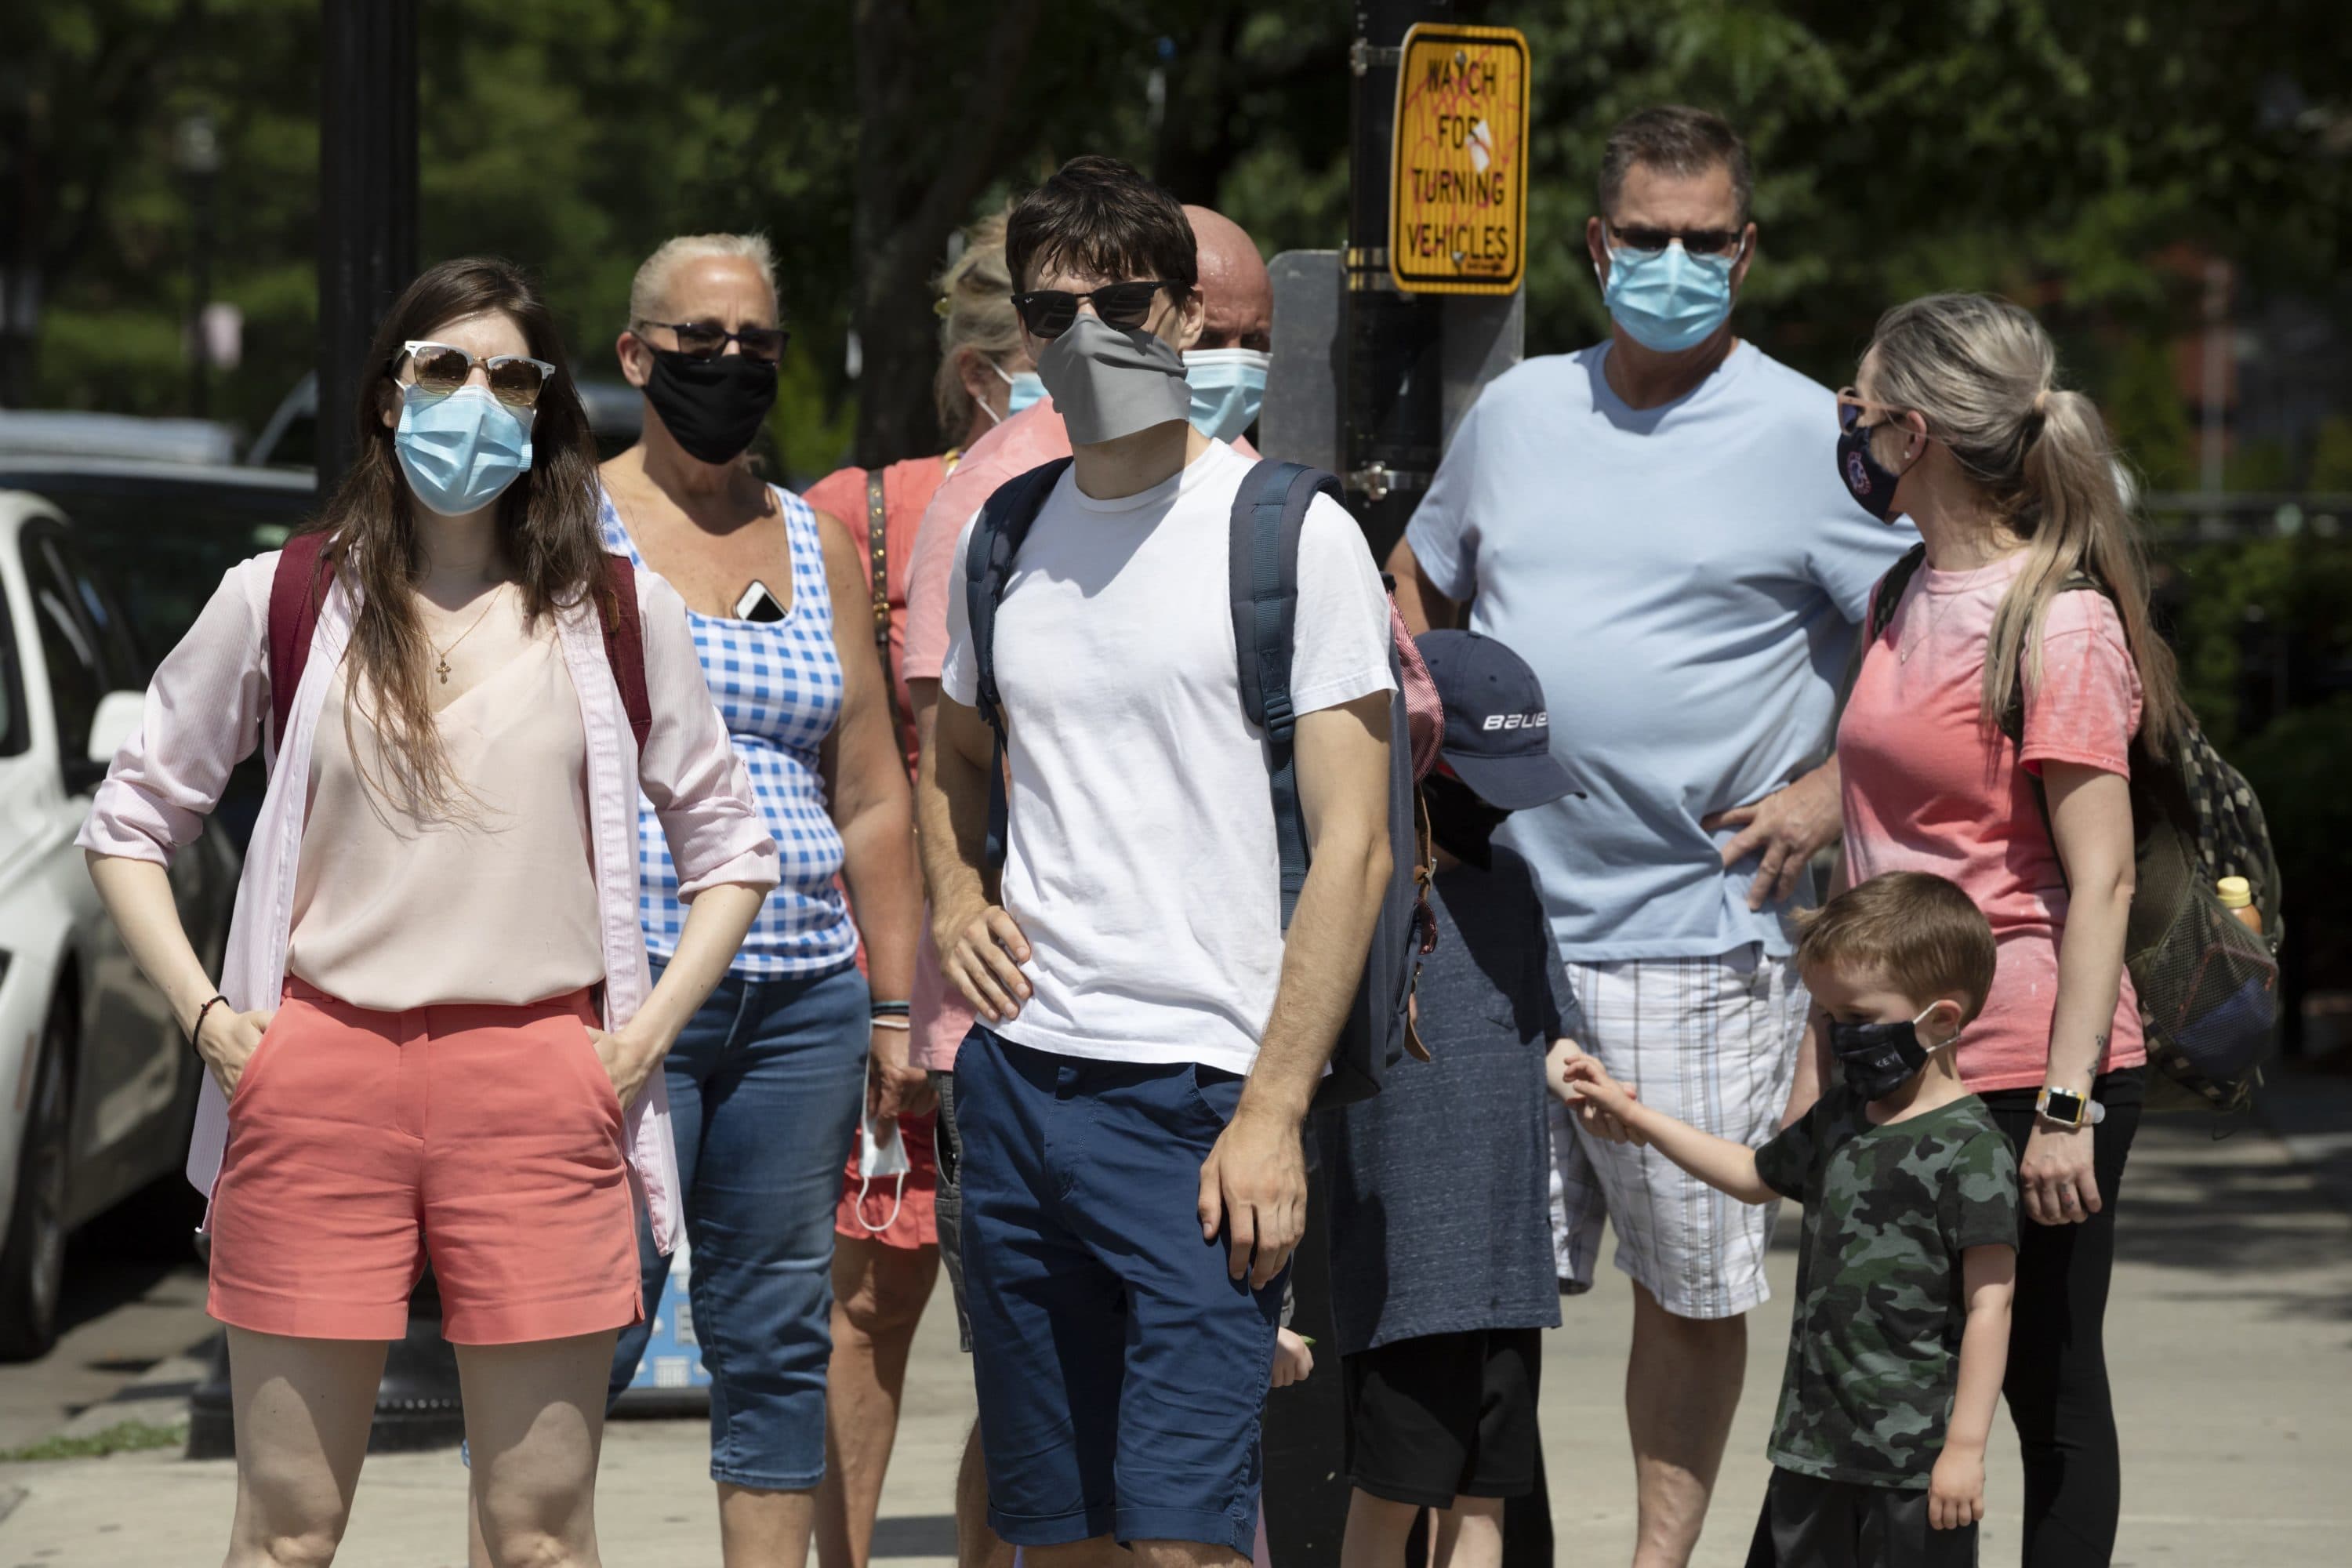 People wearing protective masks stand on the corner during a busy day on Newbury Street, July 11, 2020, in Boston. (Michael Dwyer/AP)